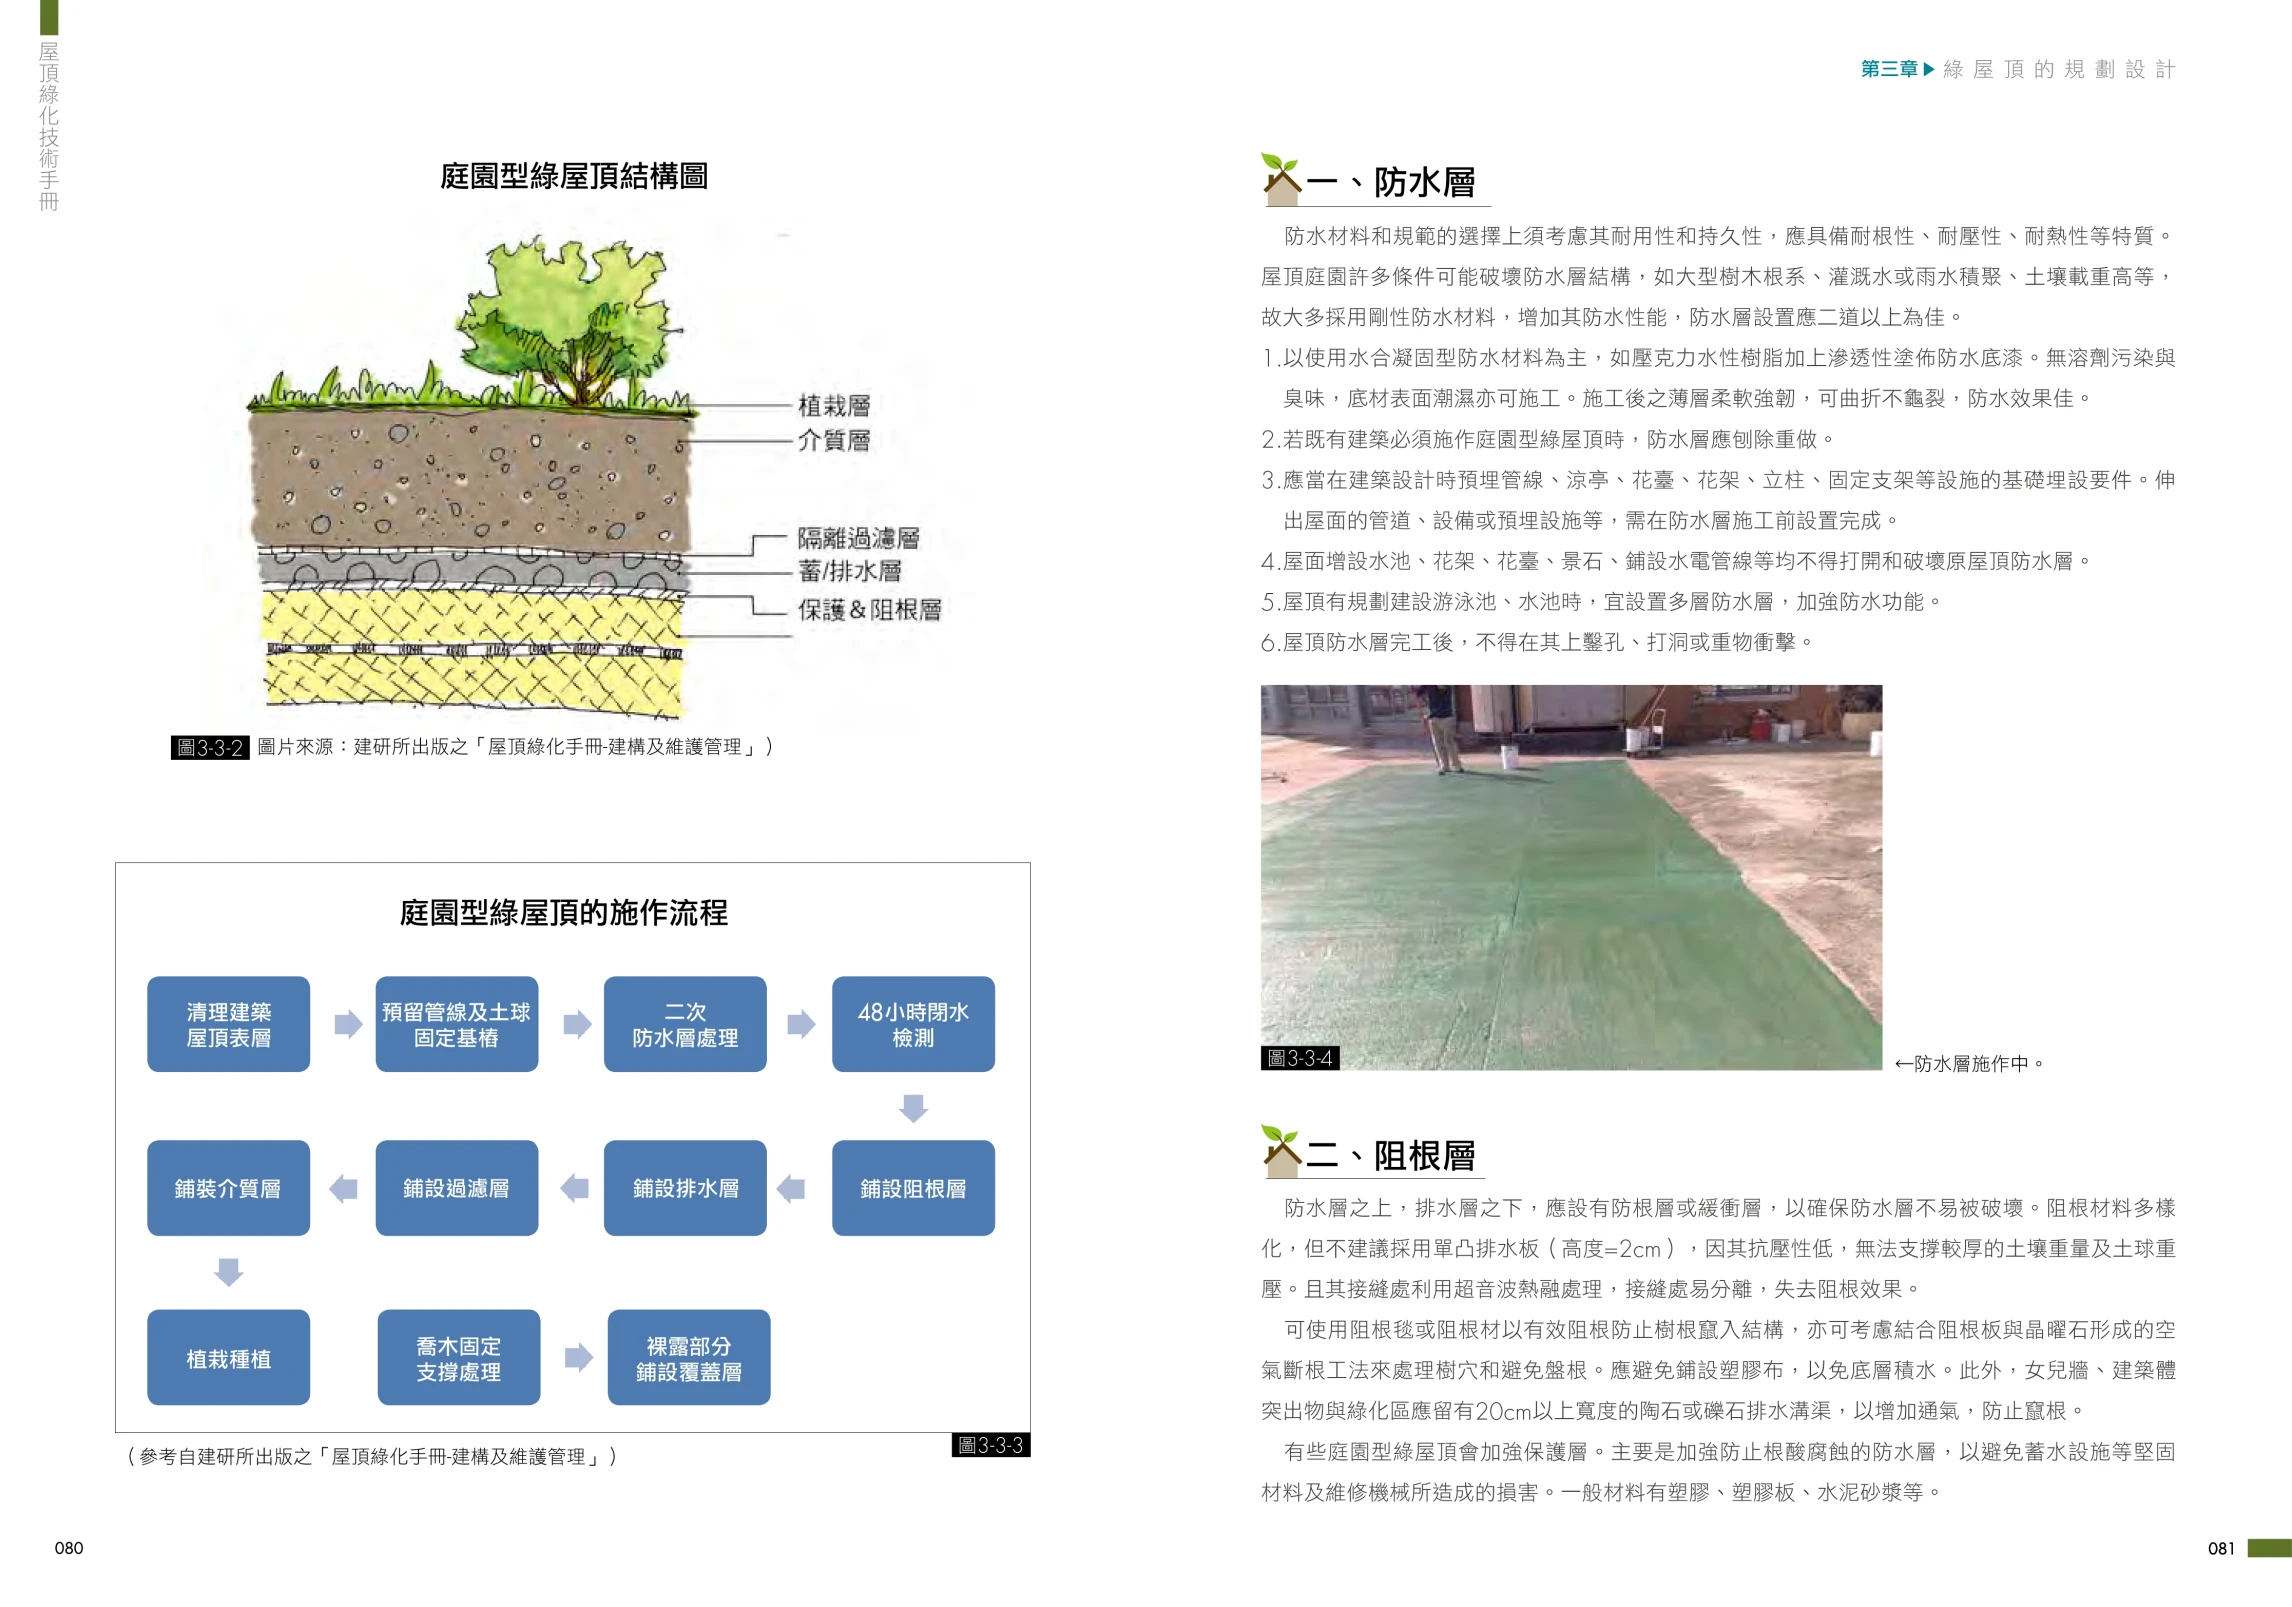 an illustration from the chinese textbook shows how to build an artificial flower pot